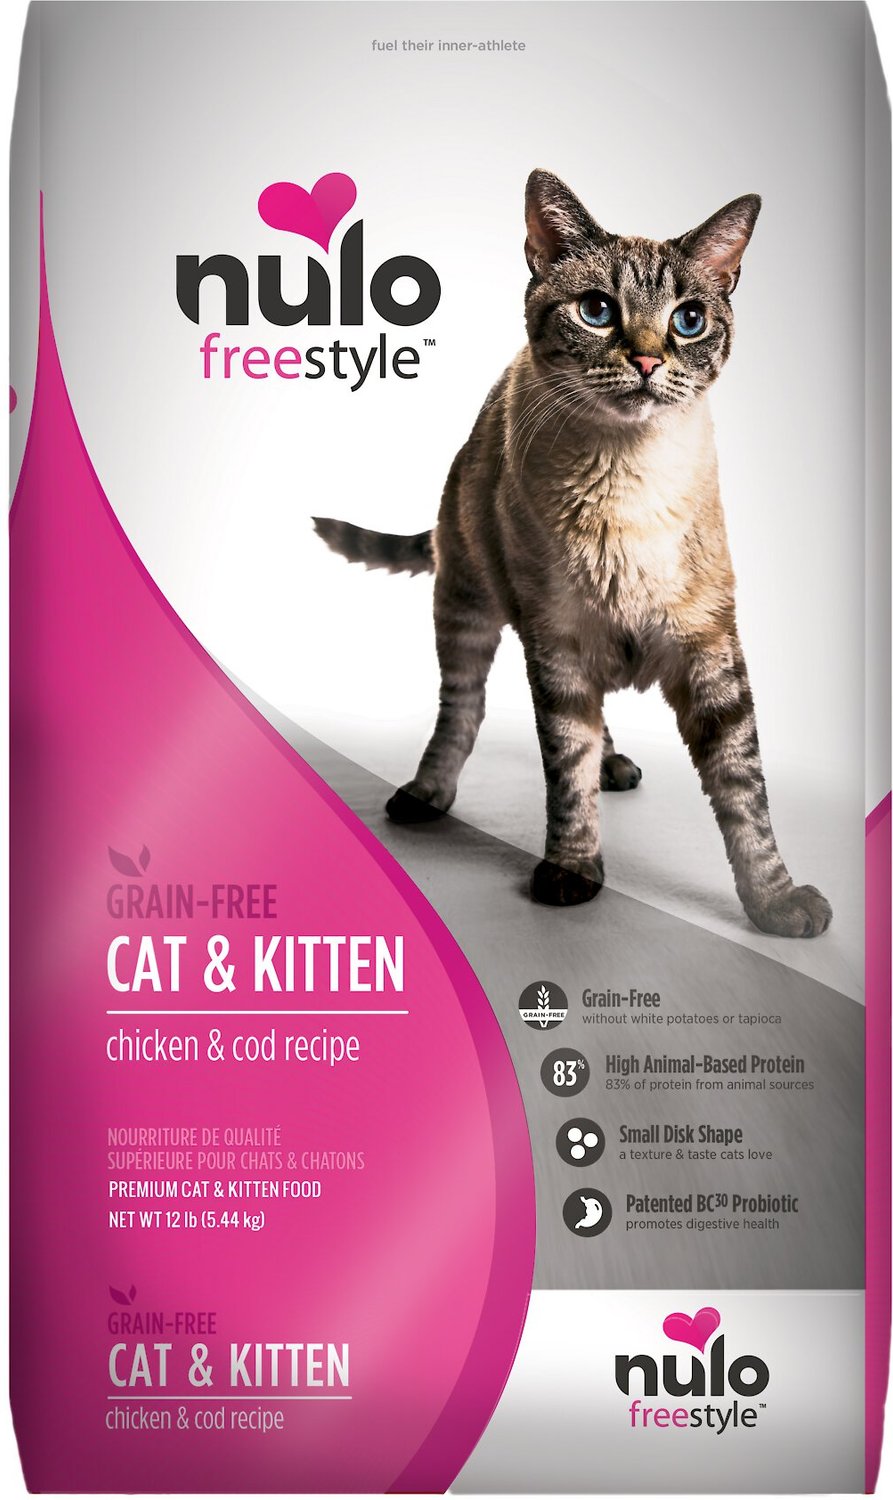 Nulo Freestyle Chicken & Cod Recipe Grain-Free Dry Cat & Kitten Food, 12-lb bag - Chewy.com